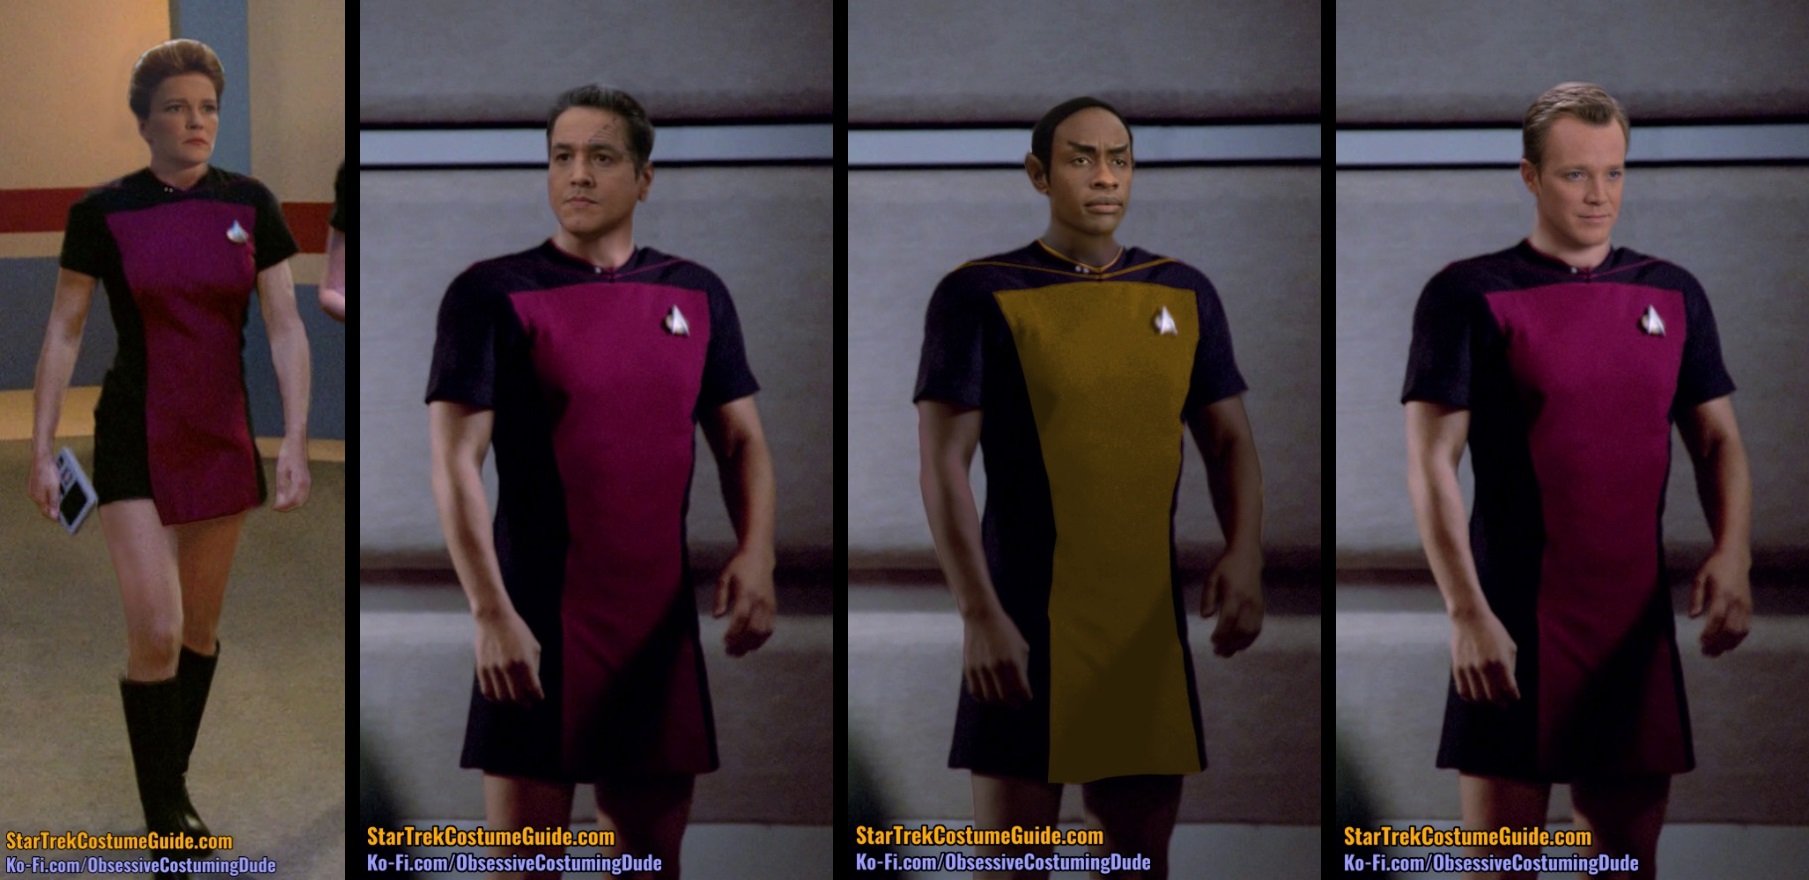 TNG skant concept gallery - Voyager cast